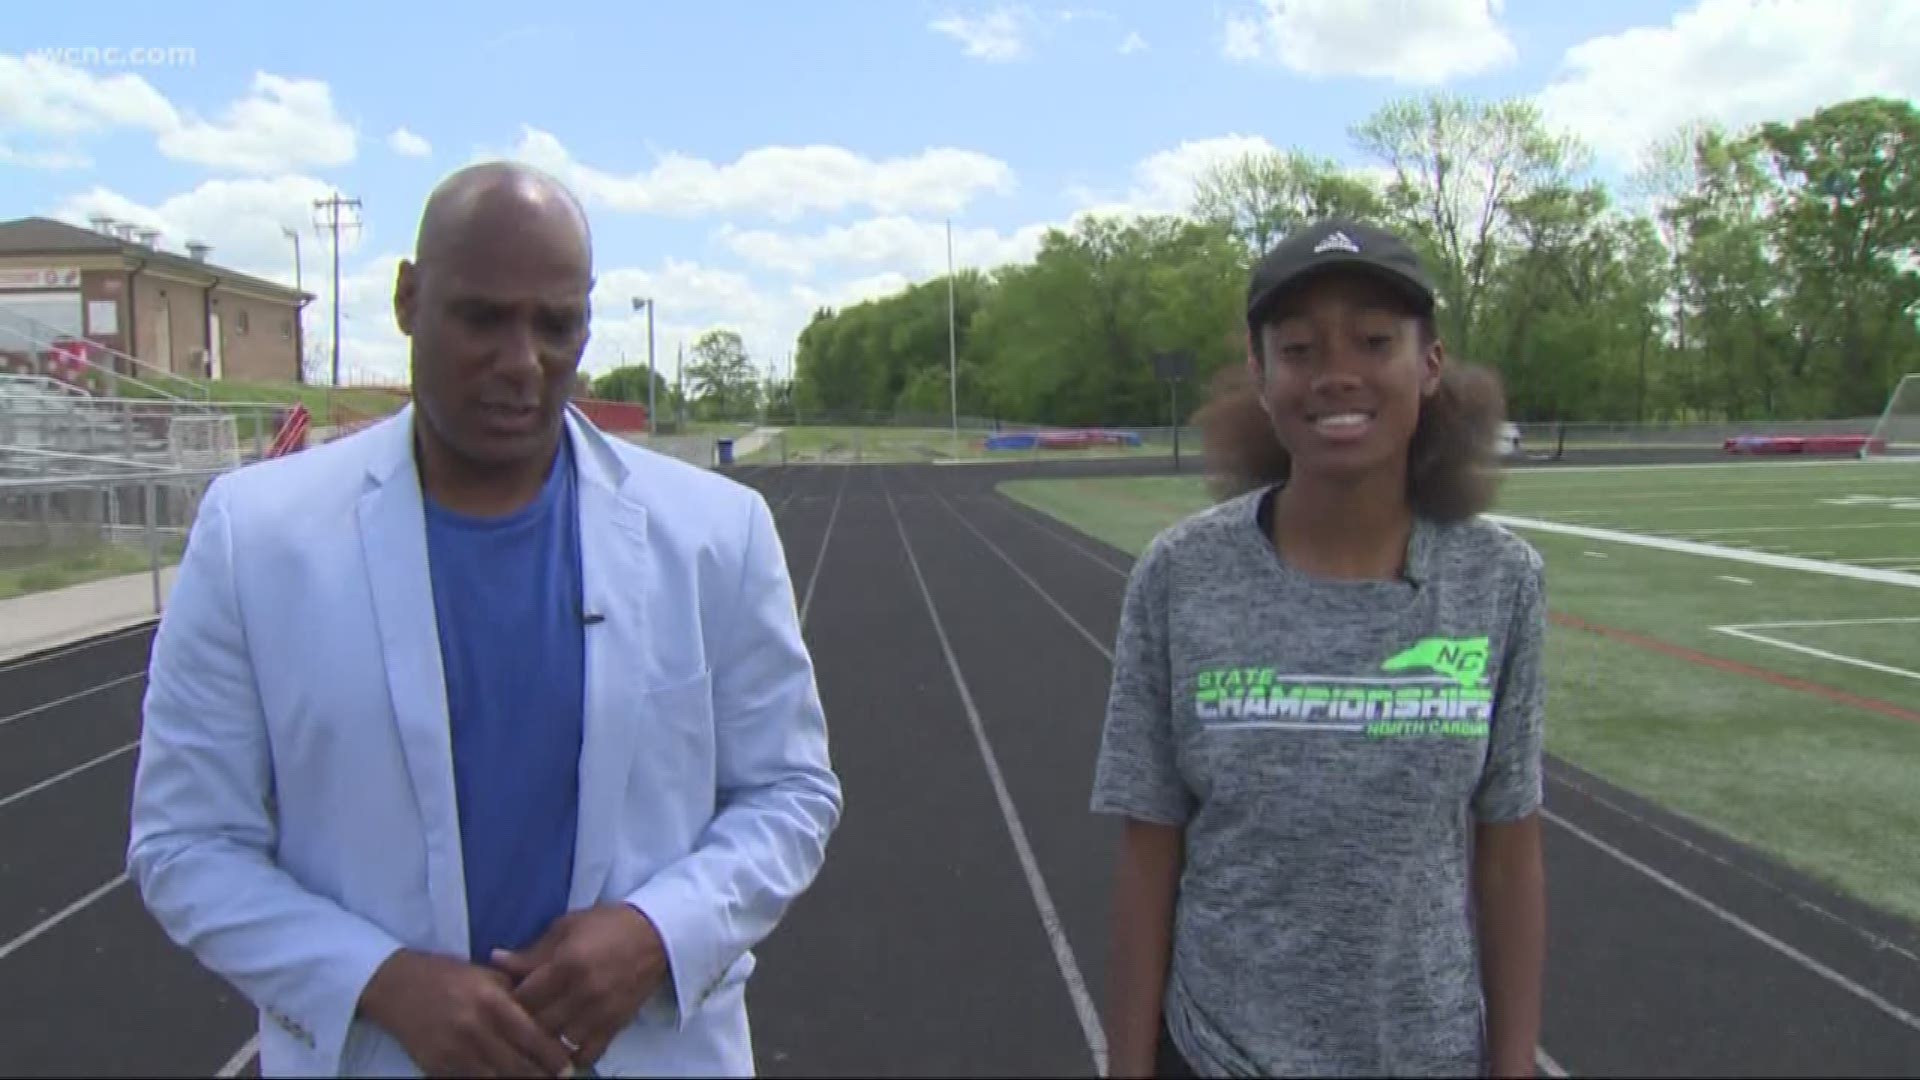 This week's student-athlete of the week takes us to the track.